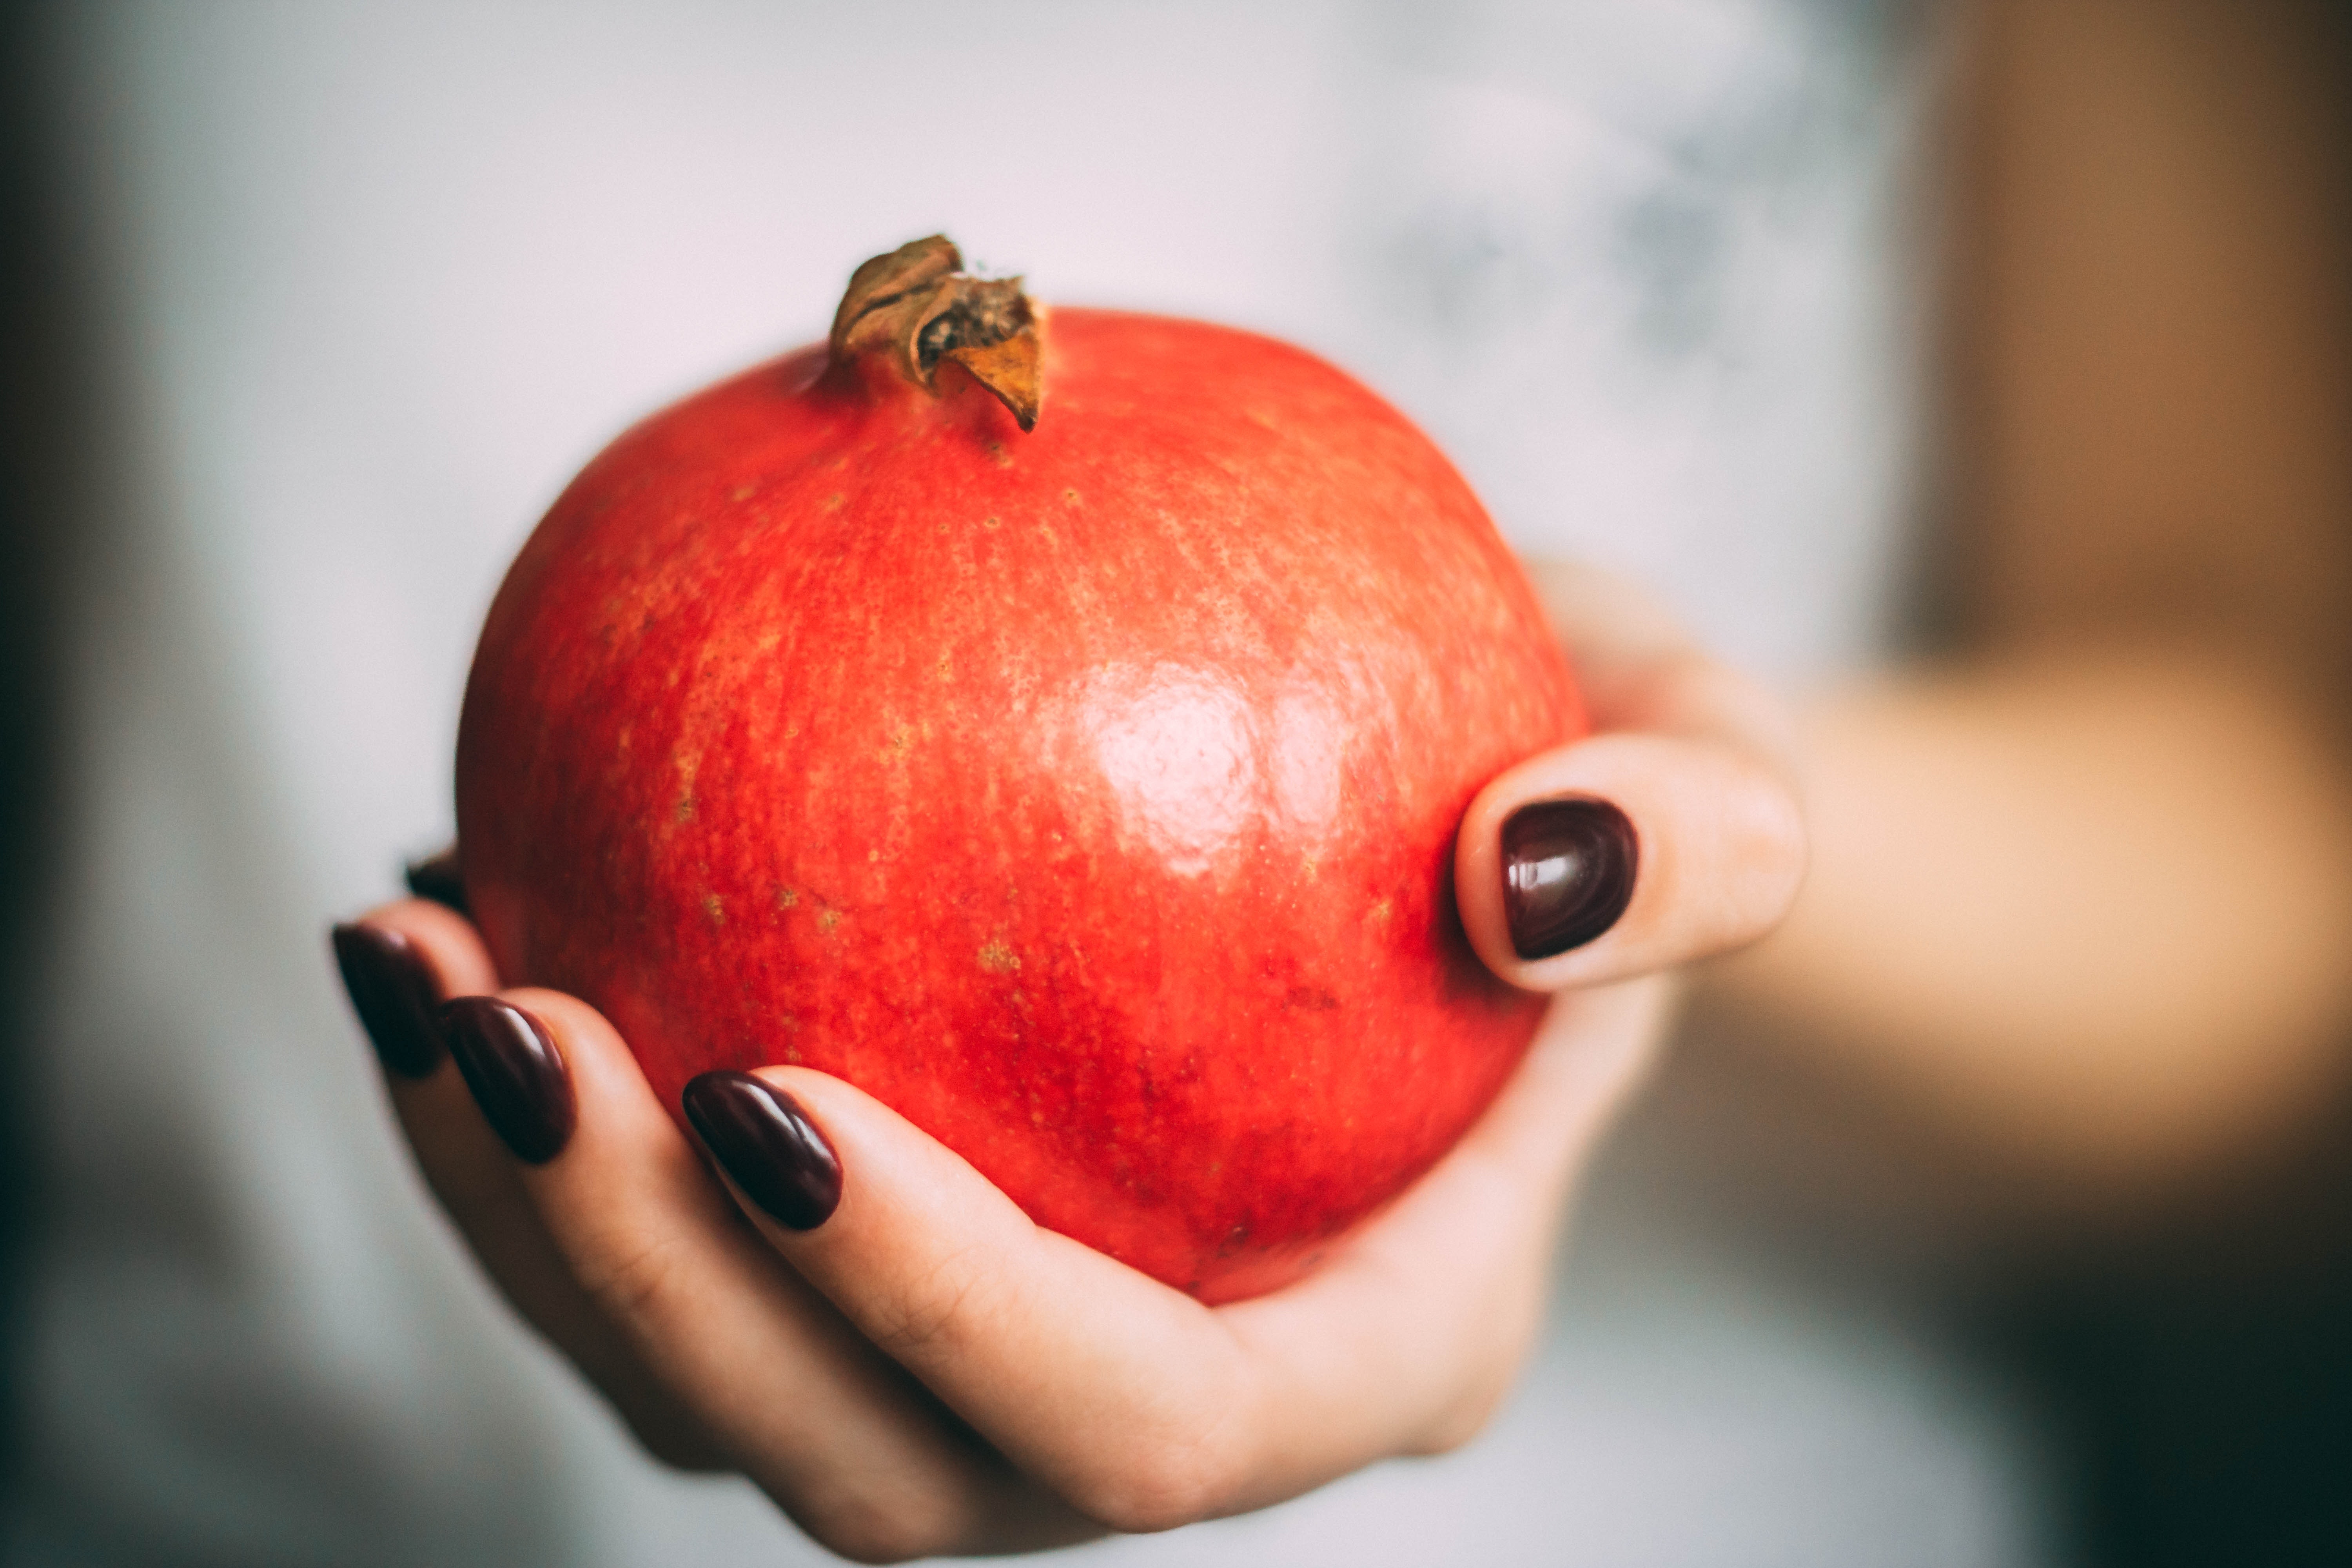 Red pomegranate at woman's hand photo